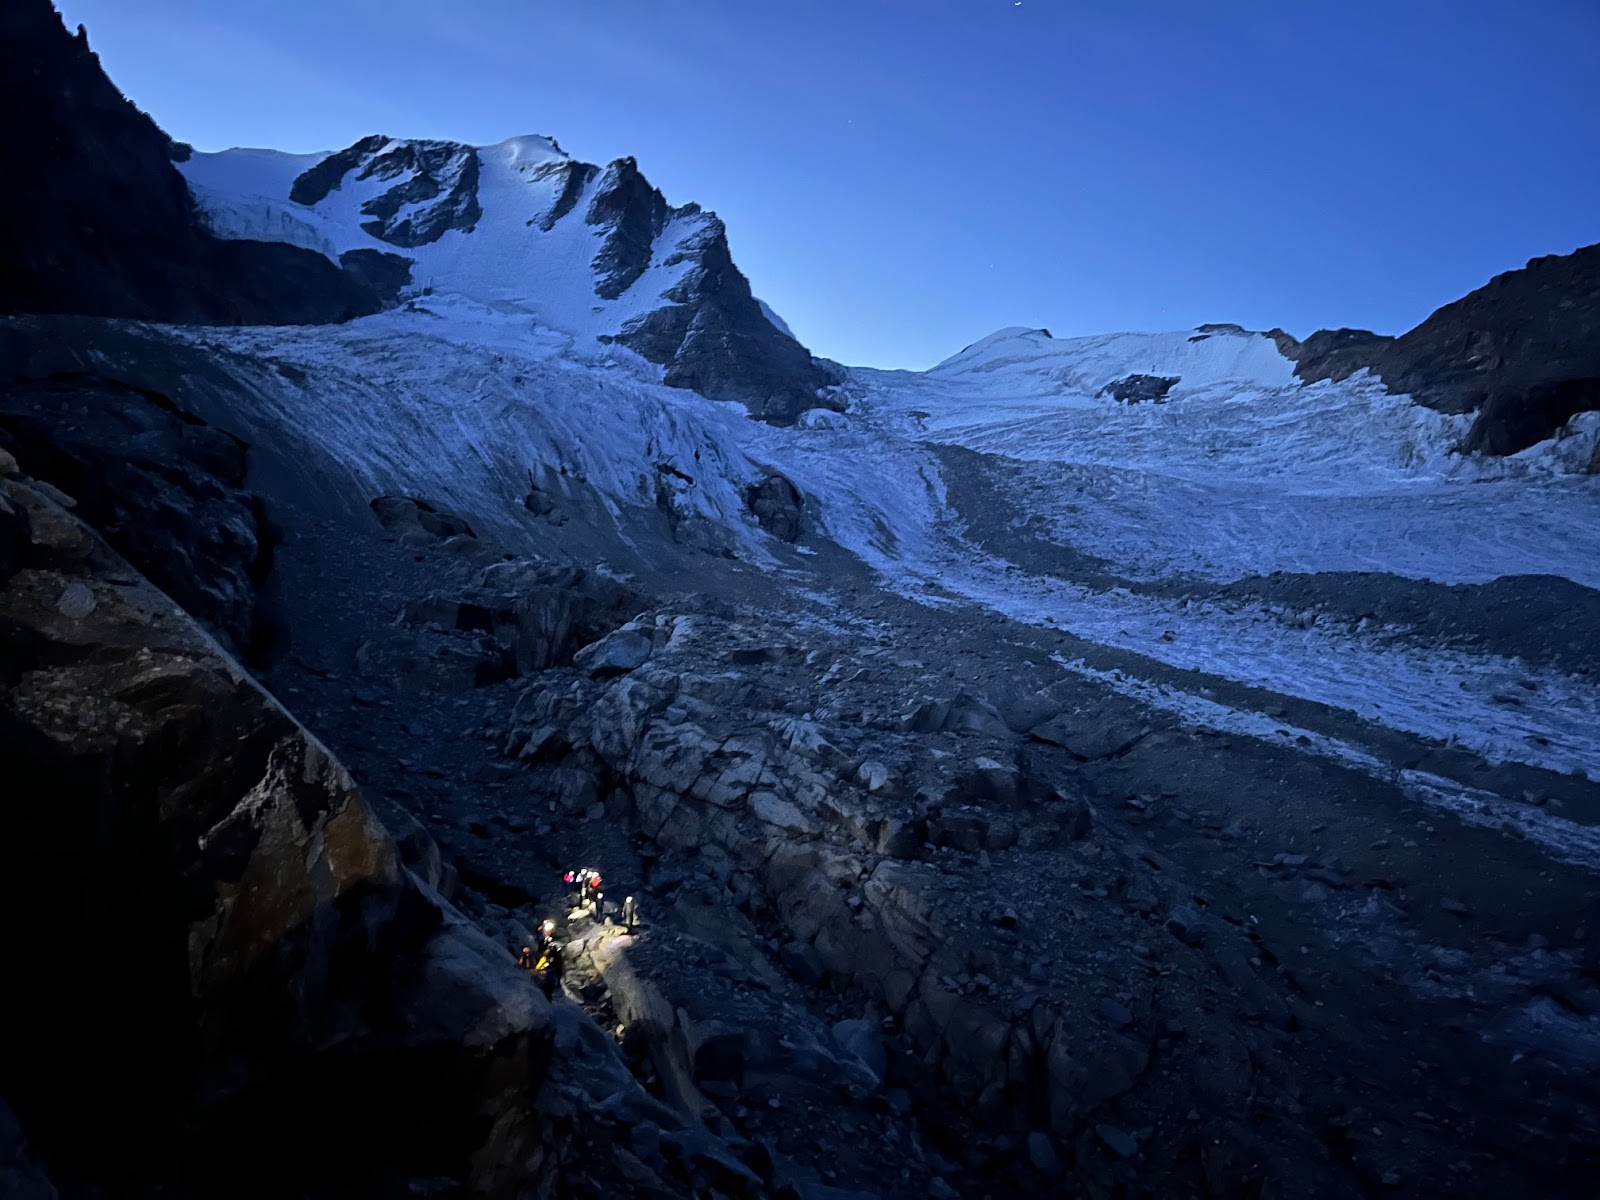 Climbers with head torches approaching the Gran Paradiso glacier as the sun begins to rise.